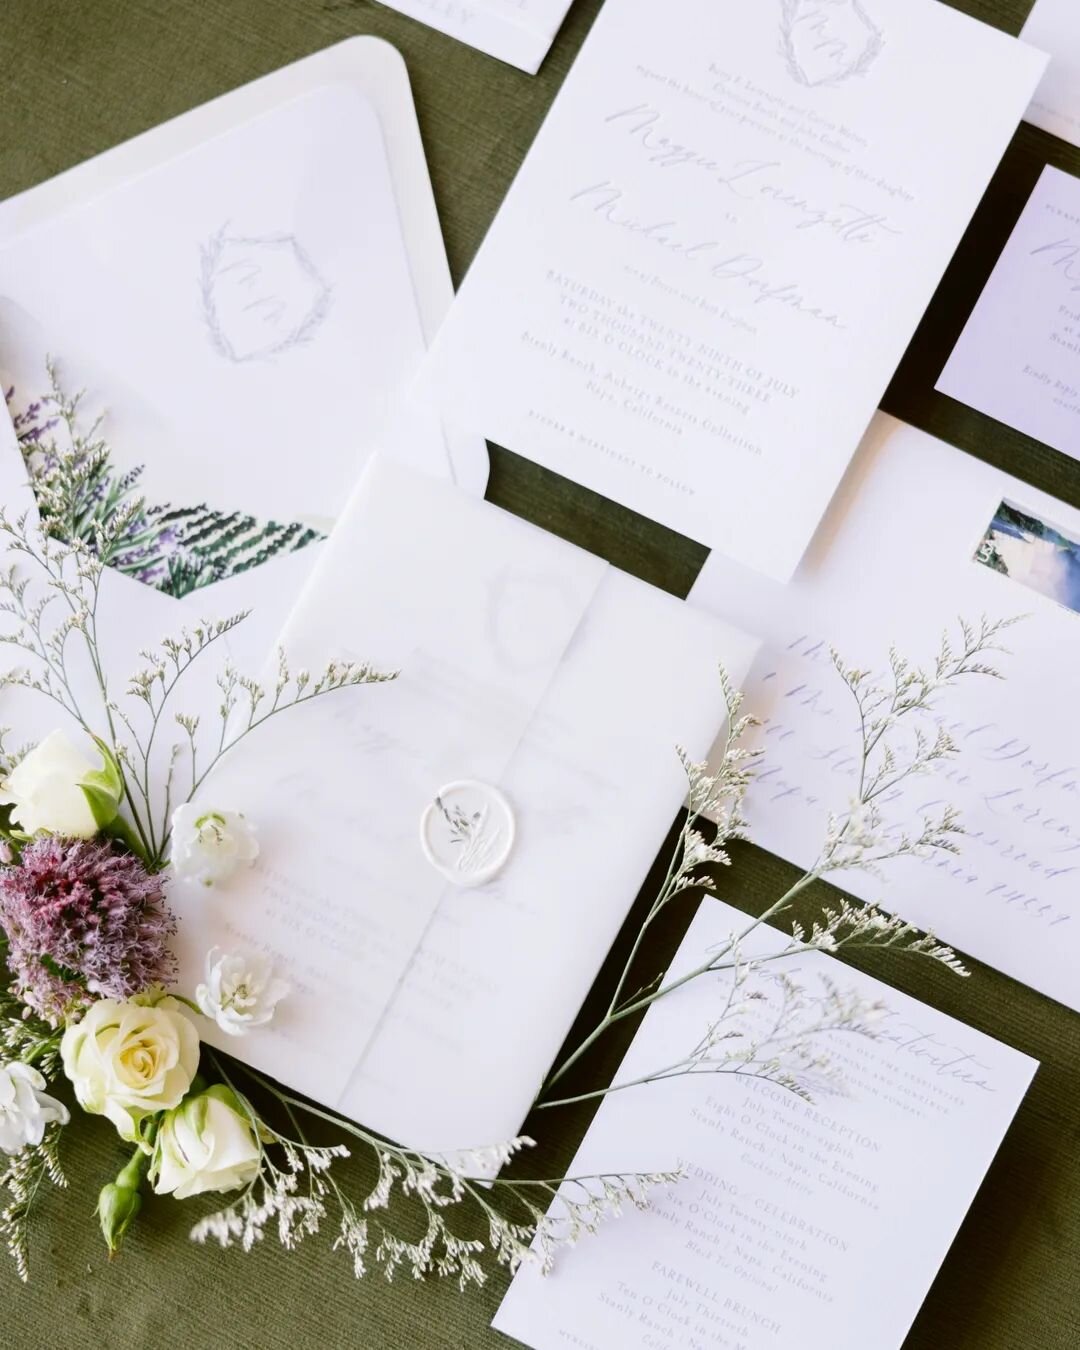 dried lavender wax seals made for the best smelling invitations ever 🪻
.
Planning &amp; Design: @coledrakeevents 
Venue &amp; Catering: @stanlyranchauberge 
Florals &amp; Production: @flowersbyedgar
Photographer: @larissaclevelandphoto 
Videographer